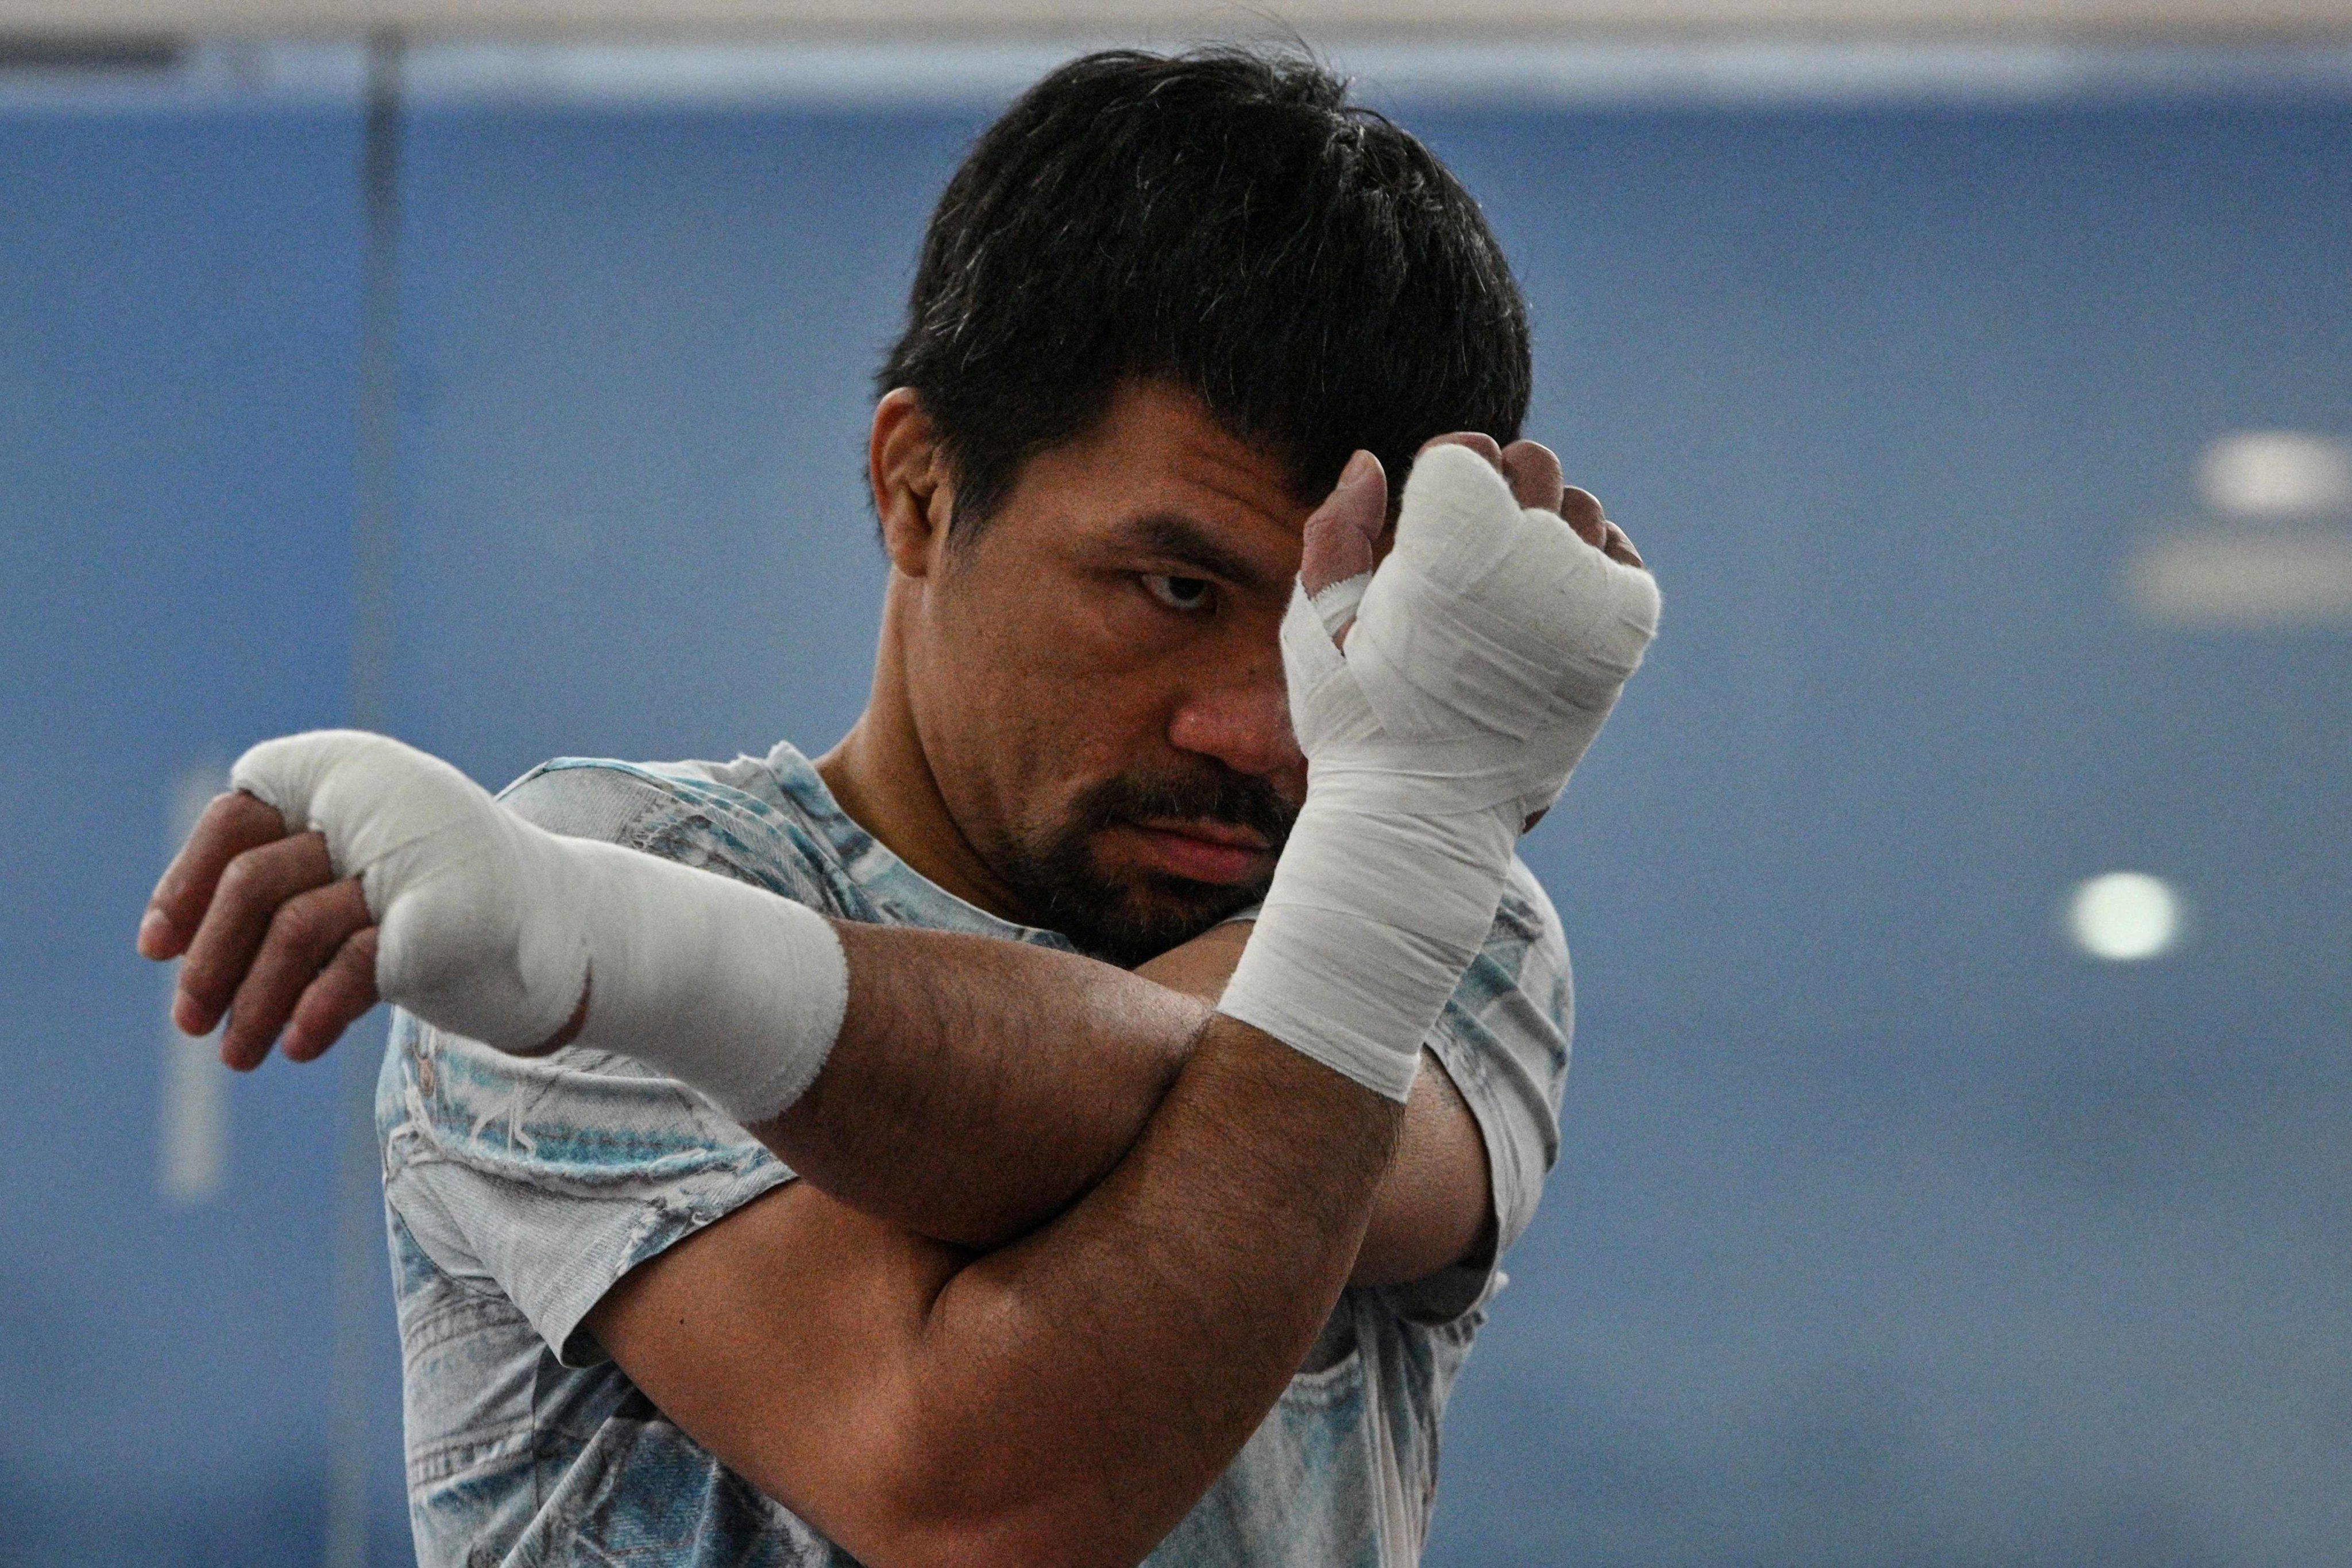 Philippine boxing legend and Senator Manny Pacquiao training at his gym in the city of General Santos in the southern island of Mindanao. Photo: AFP